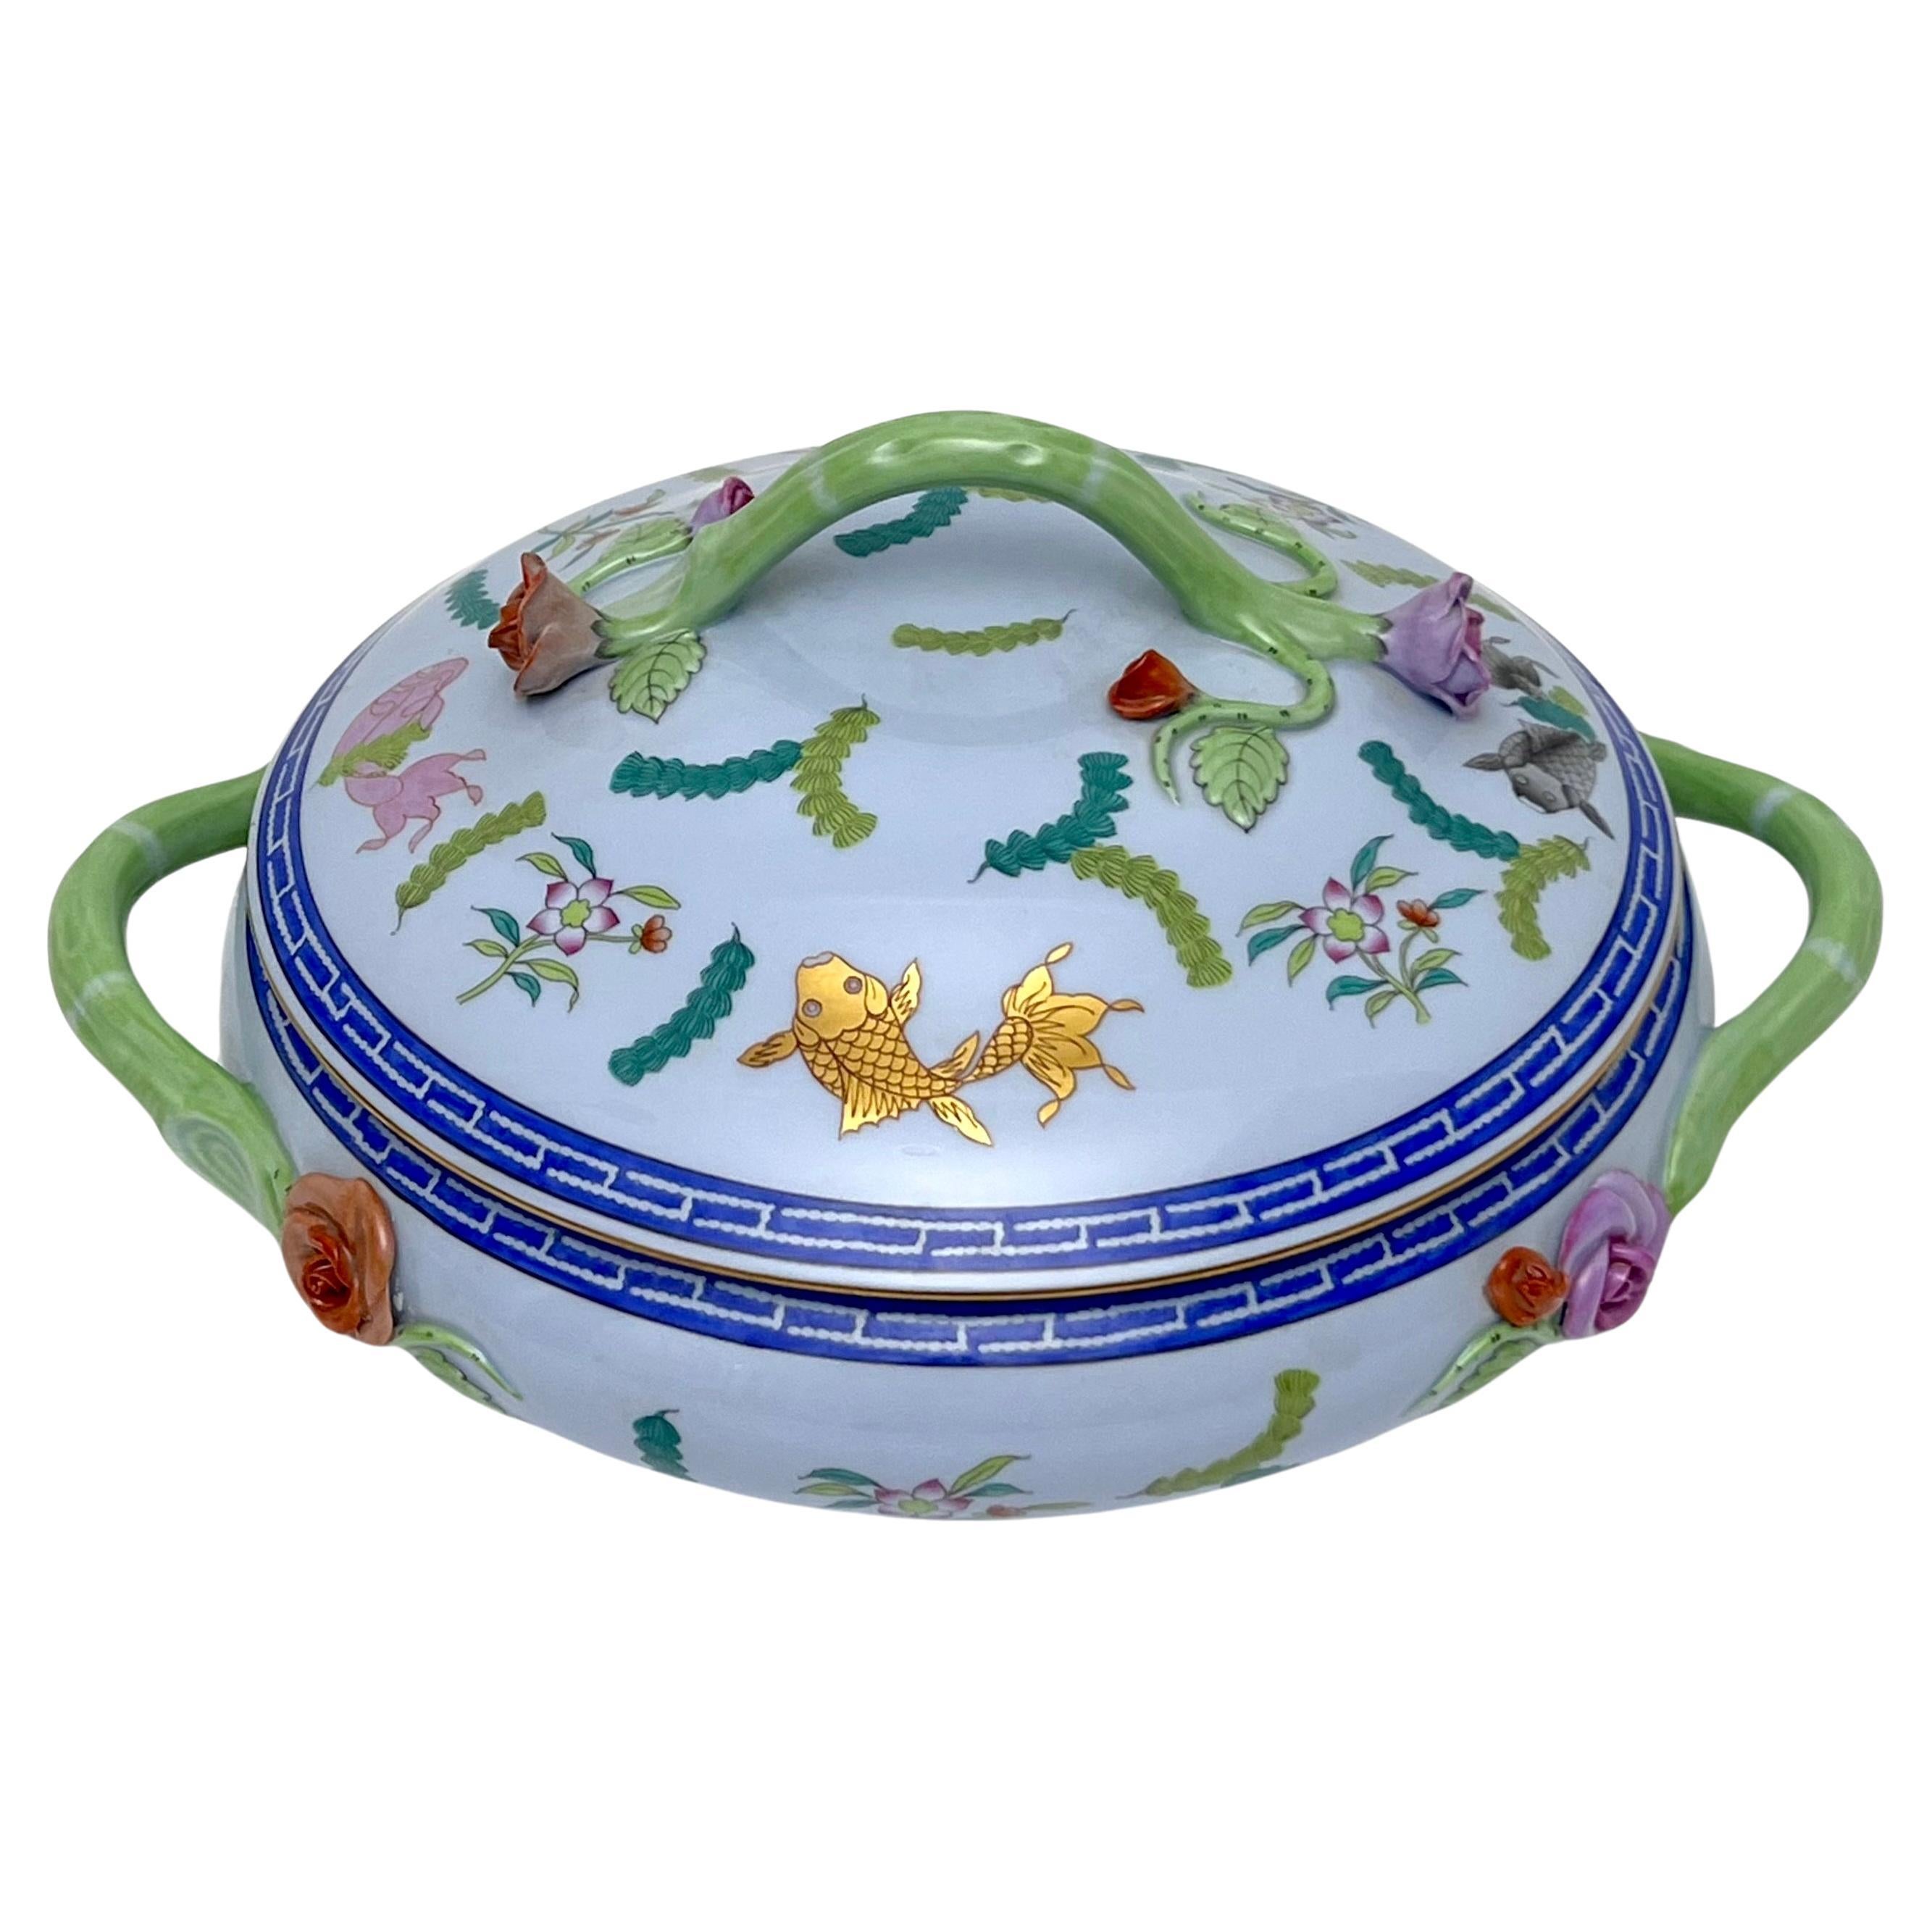 Rare Herend Poisson Tureen in Blue with fish and seaweed and the signature rose petal handles. The blue in this design is more rare than the white background and this piece at 35 plus years is almost in mint condition. This is a medium size tureen